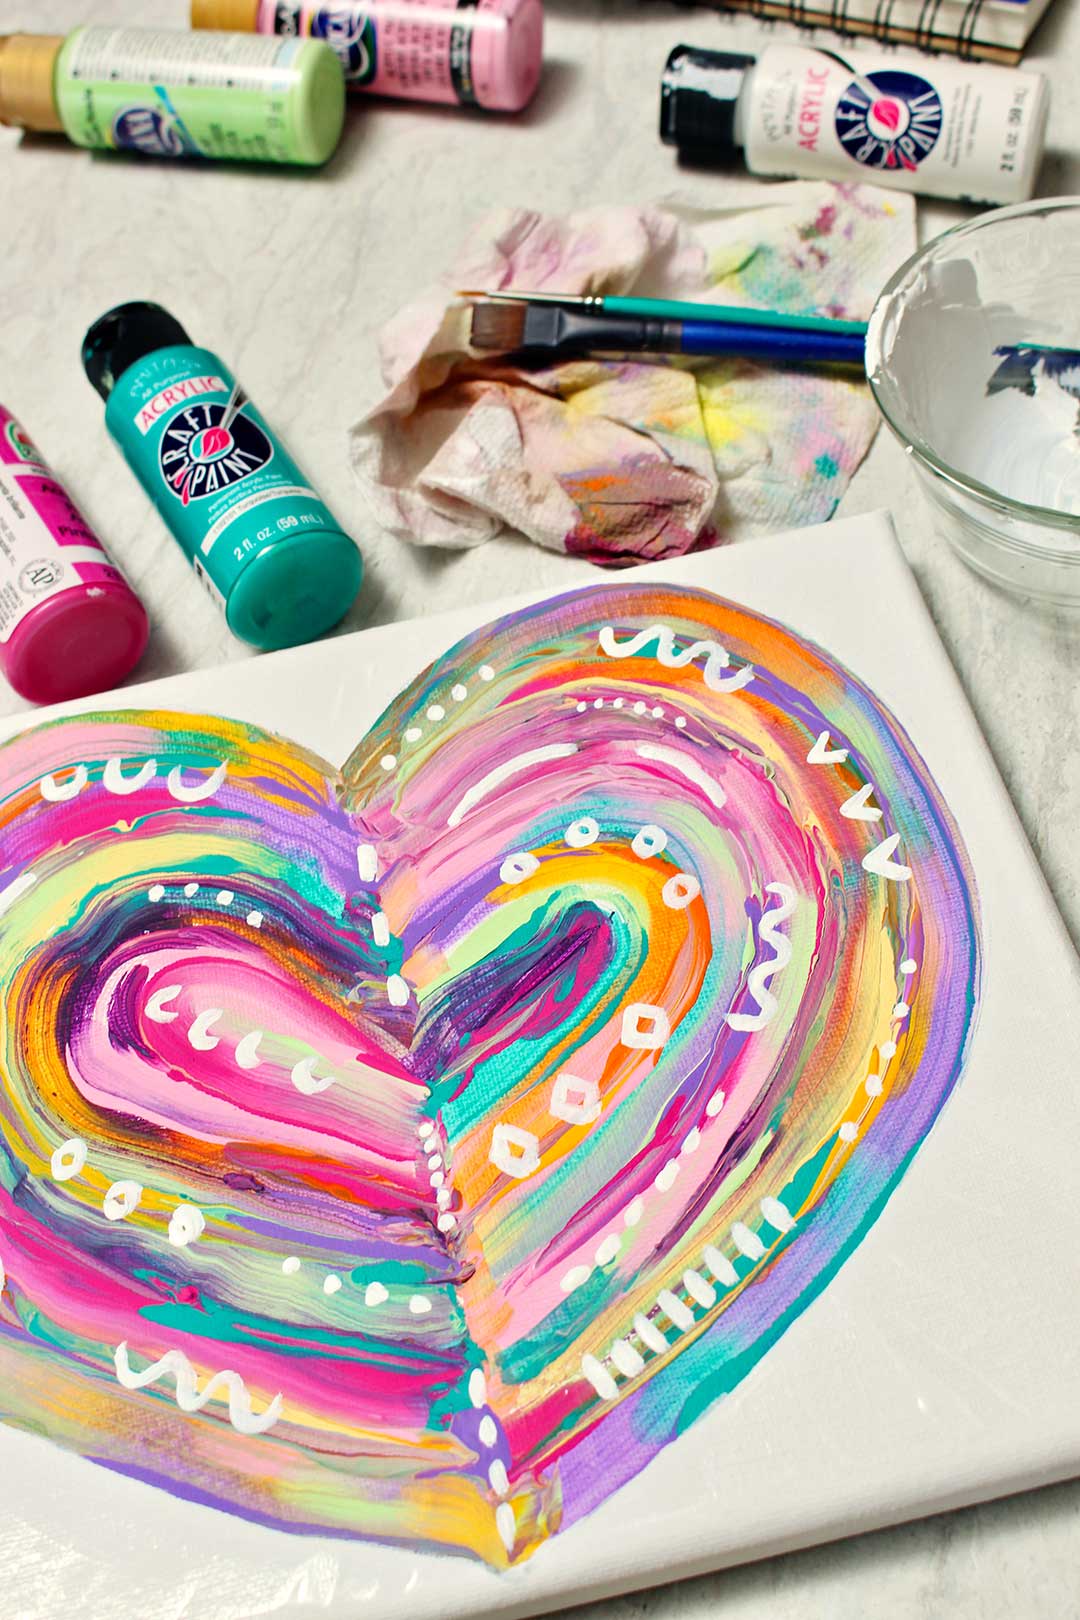 Finished abstract heart painting with white abstract designs with painting supplies near by.